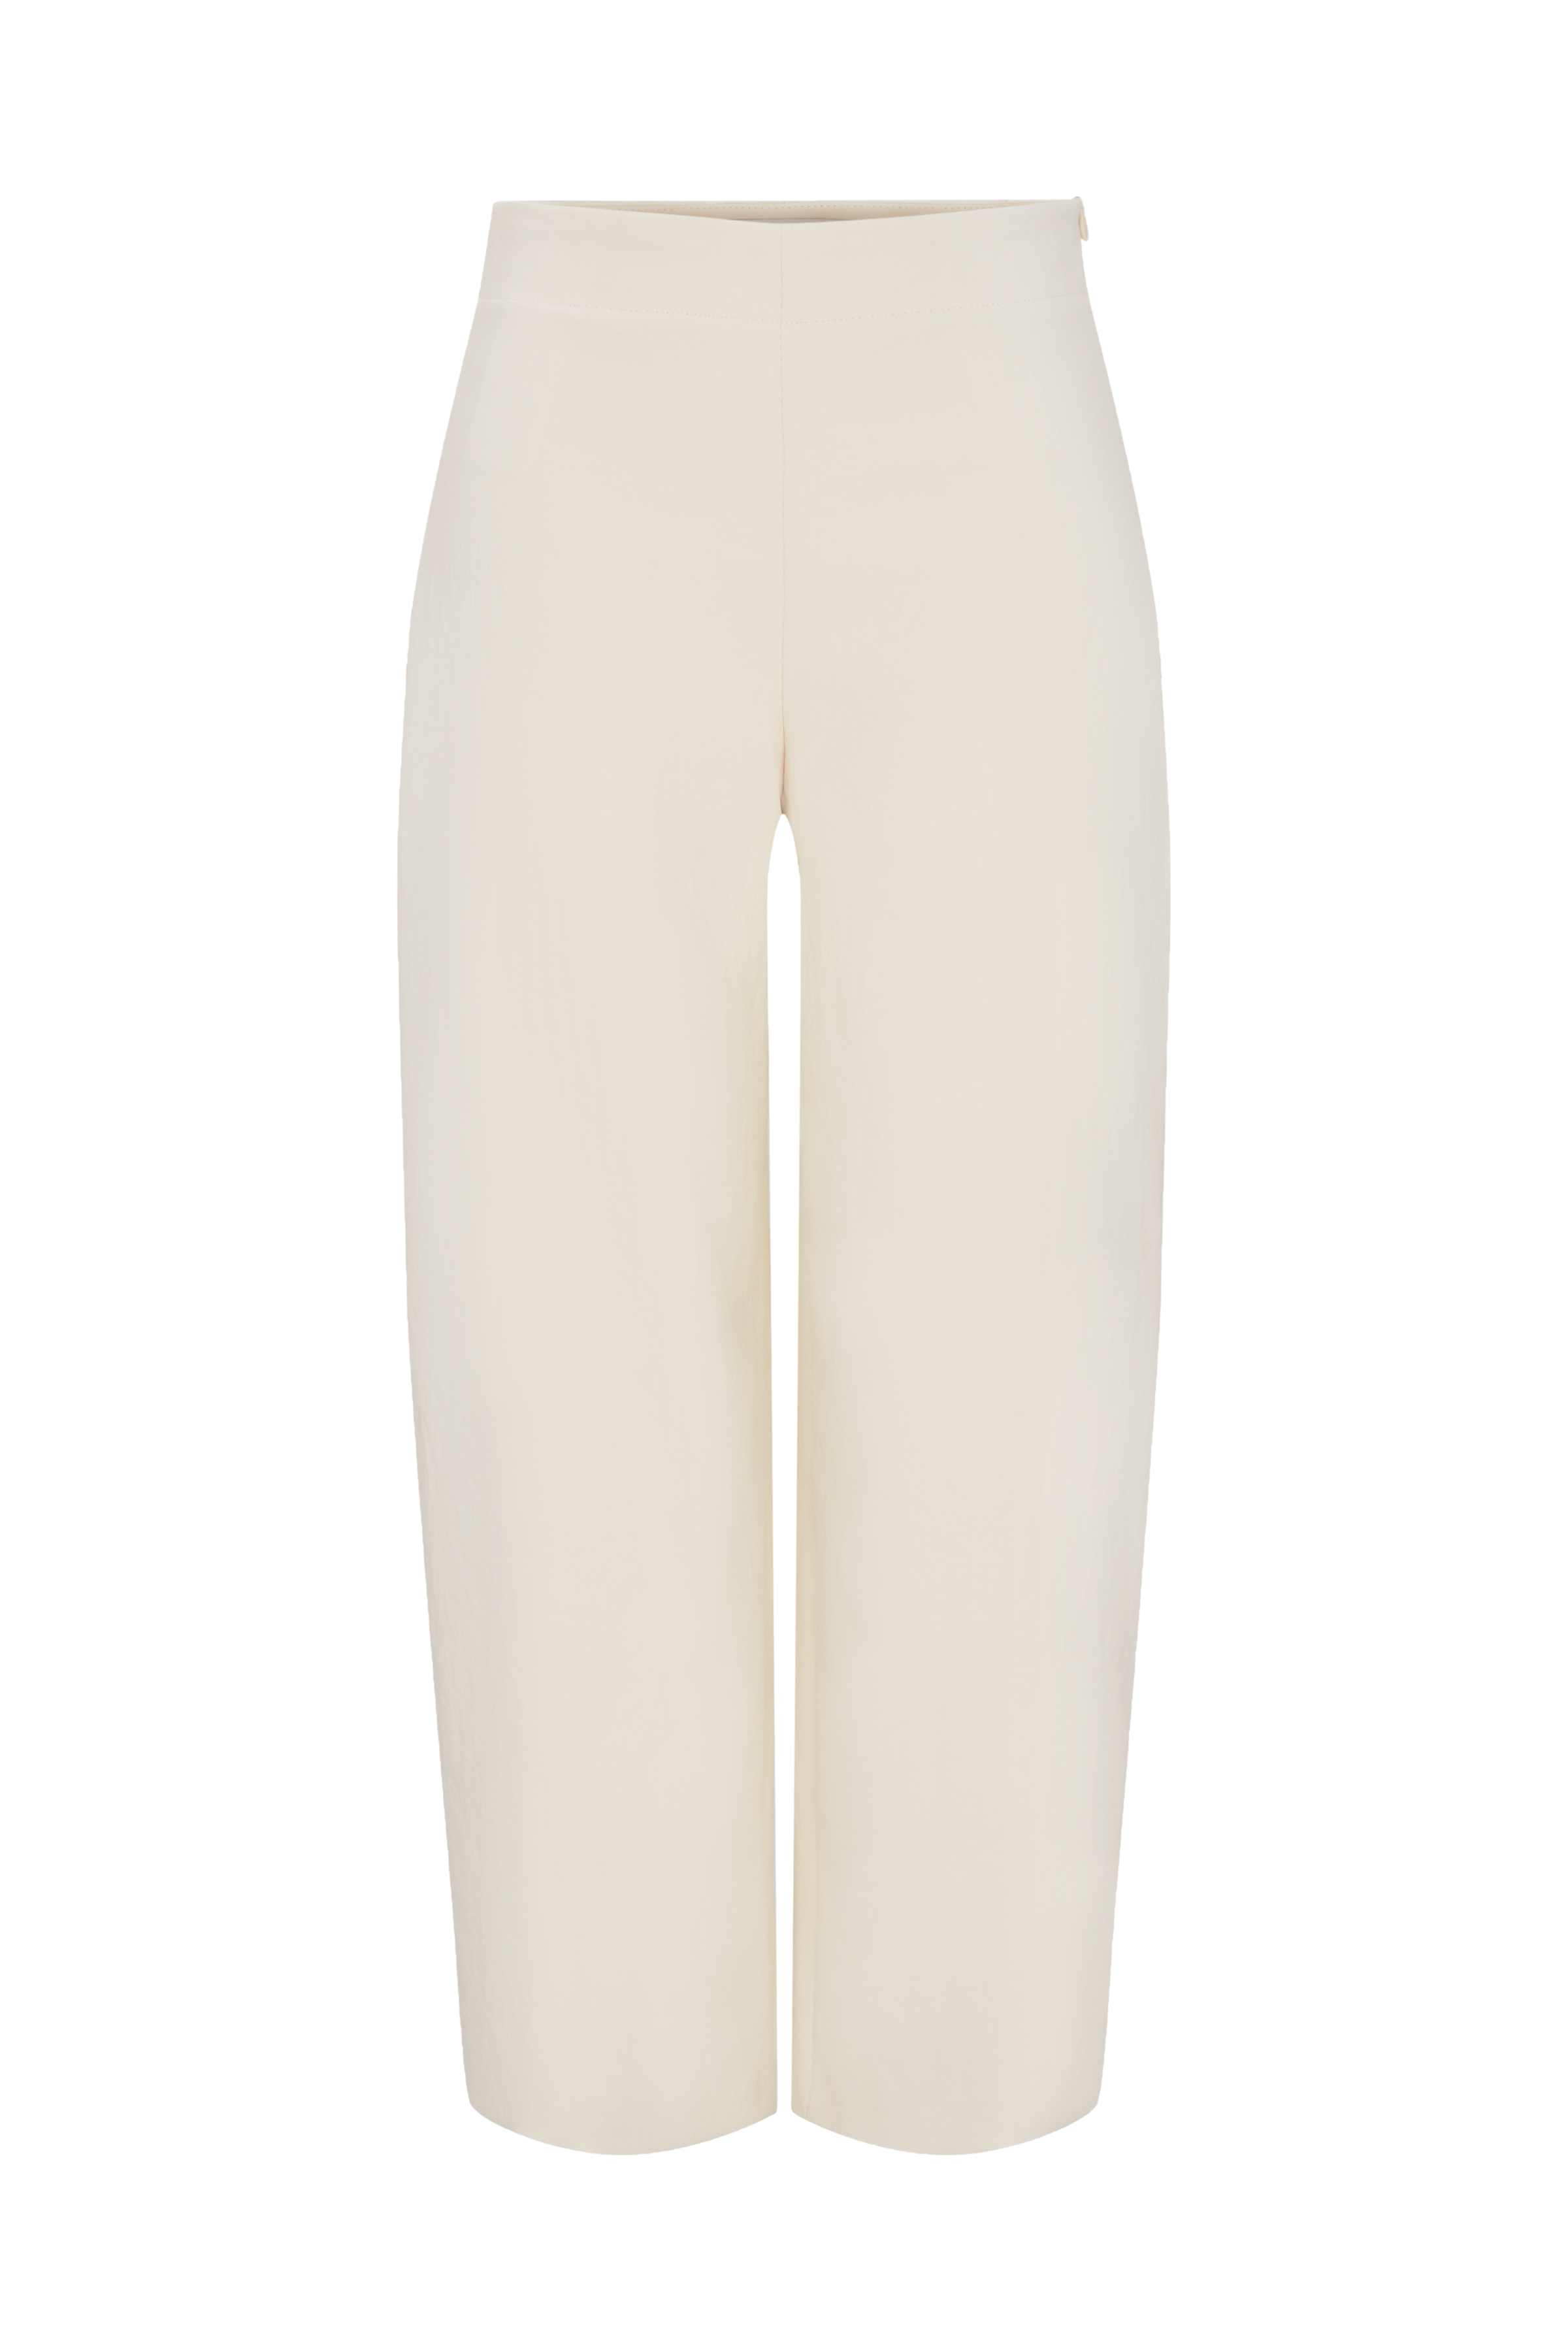 DRYKORN CULOTTE SEAL OFFWHITE 